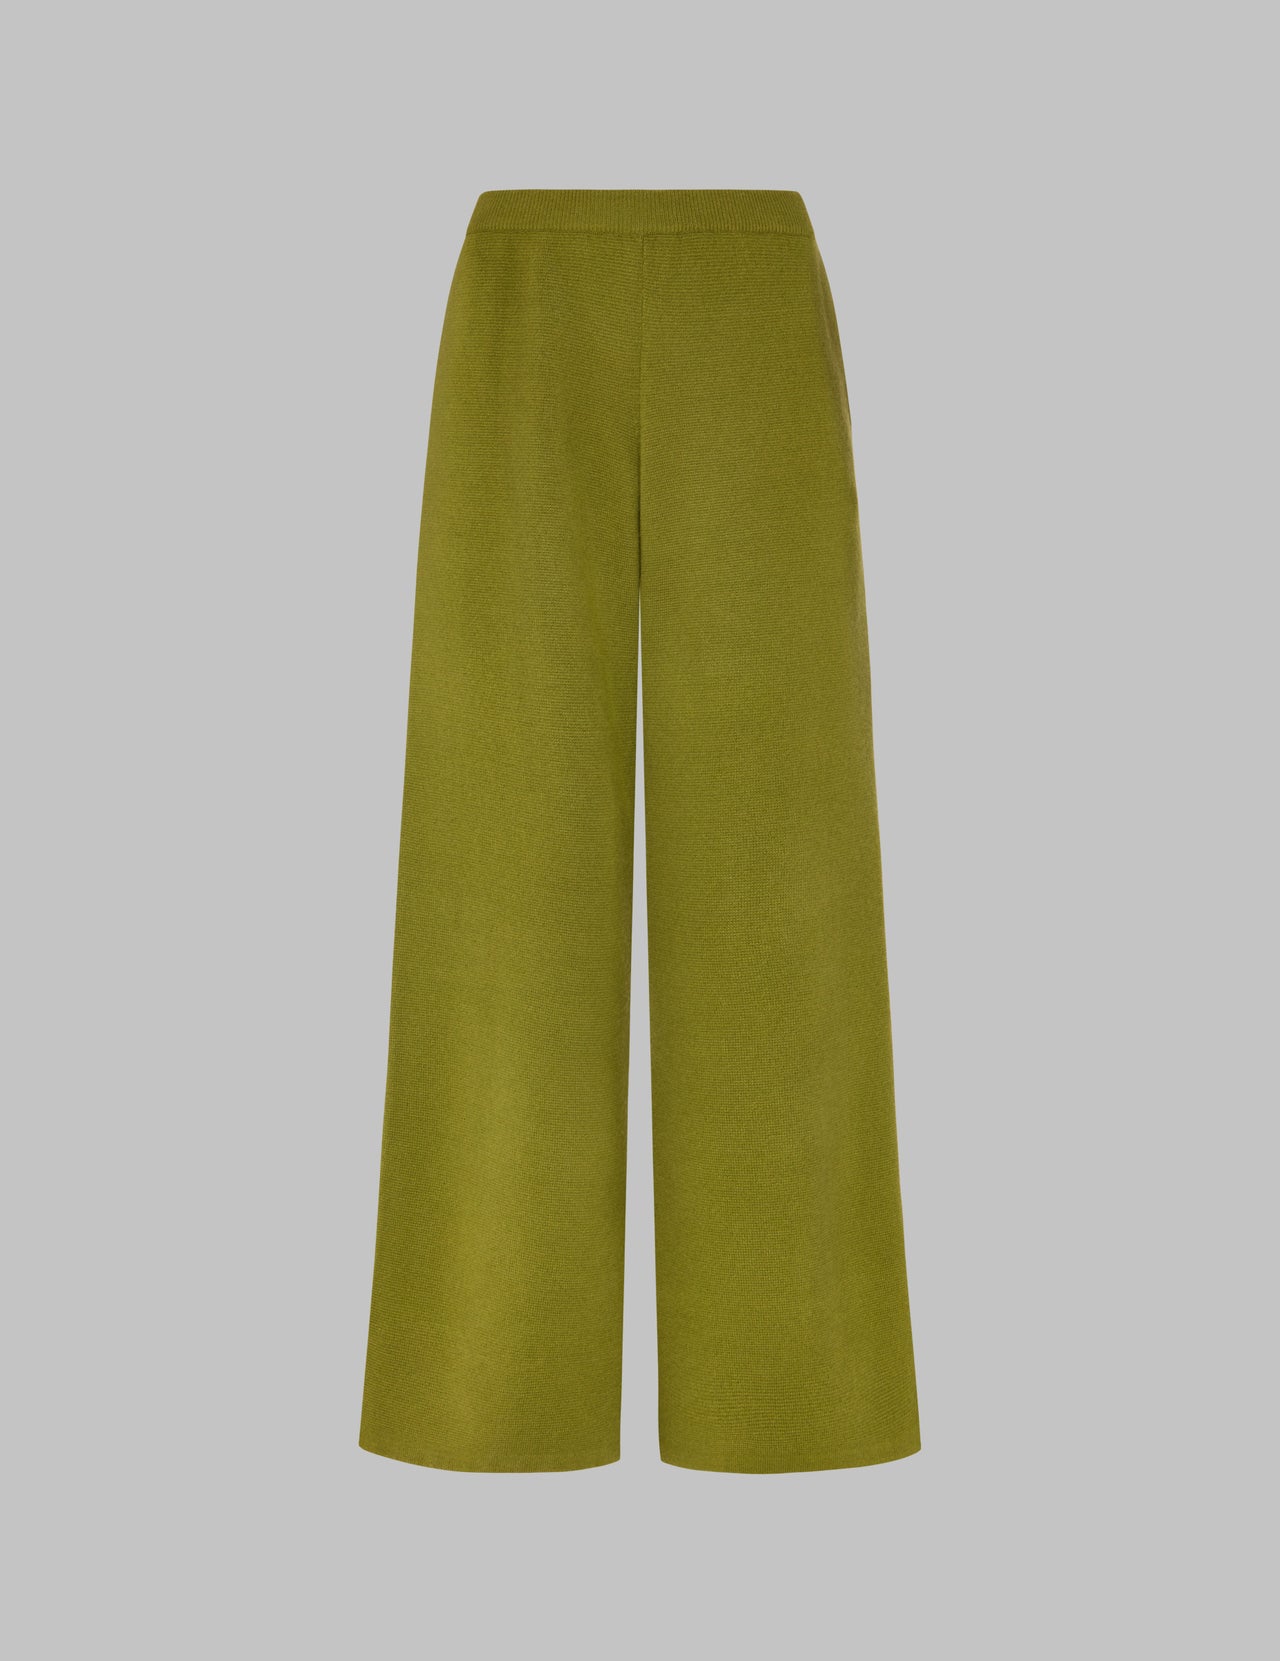  Bamboo Green Cropped Cashmere Straight Leg Trousers  